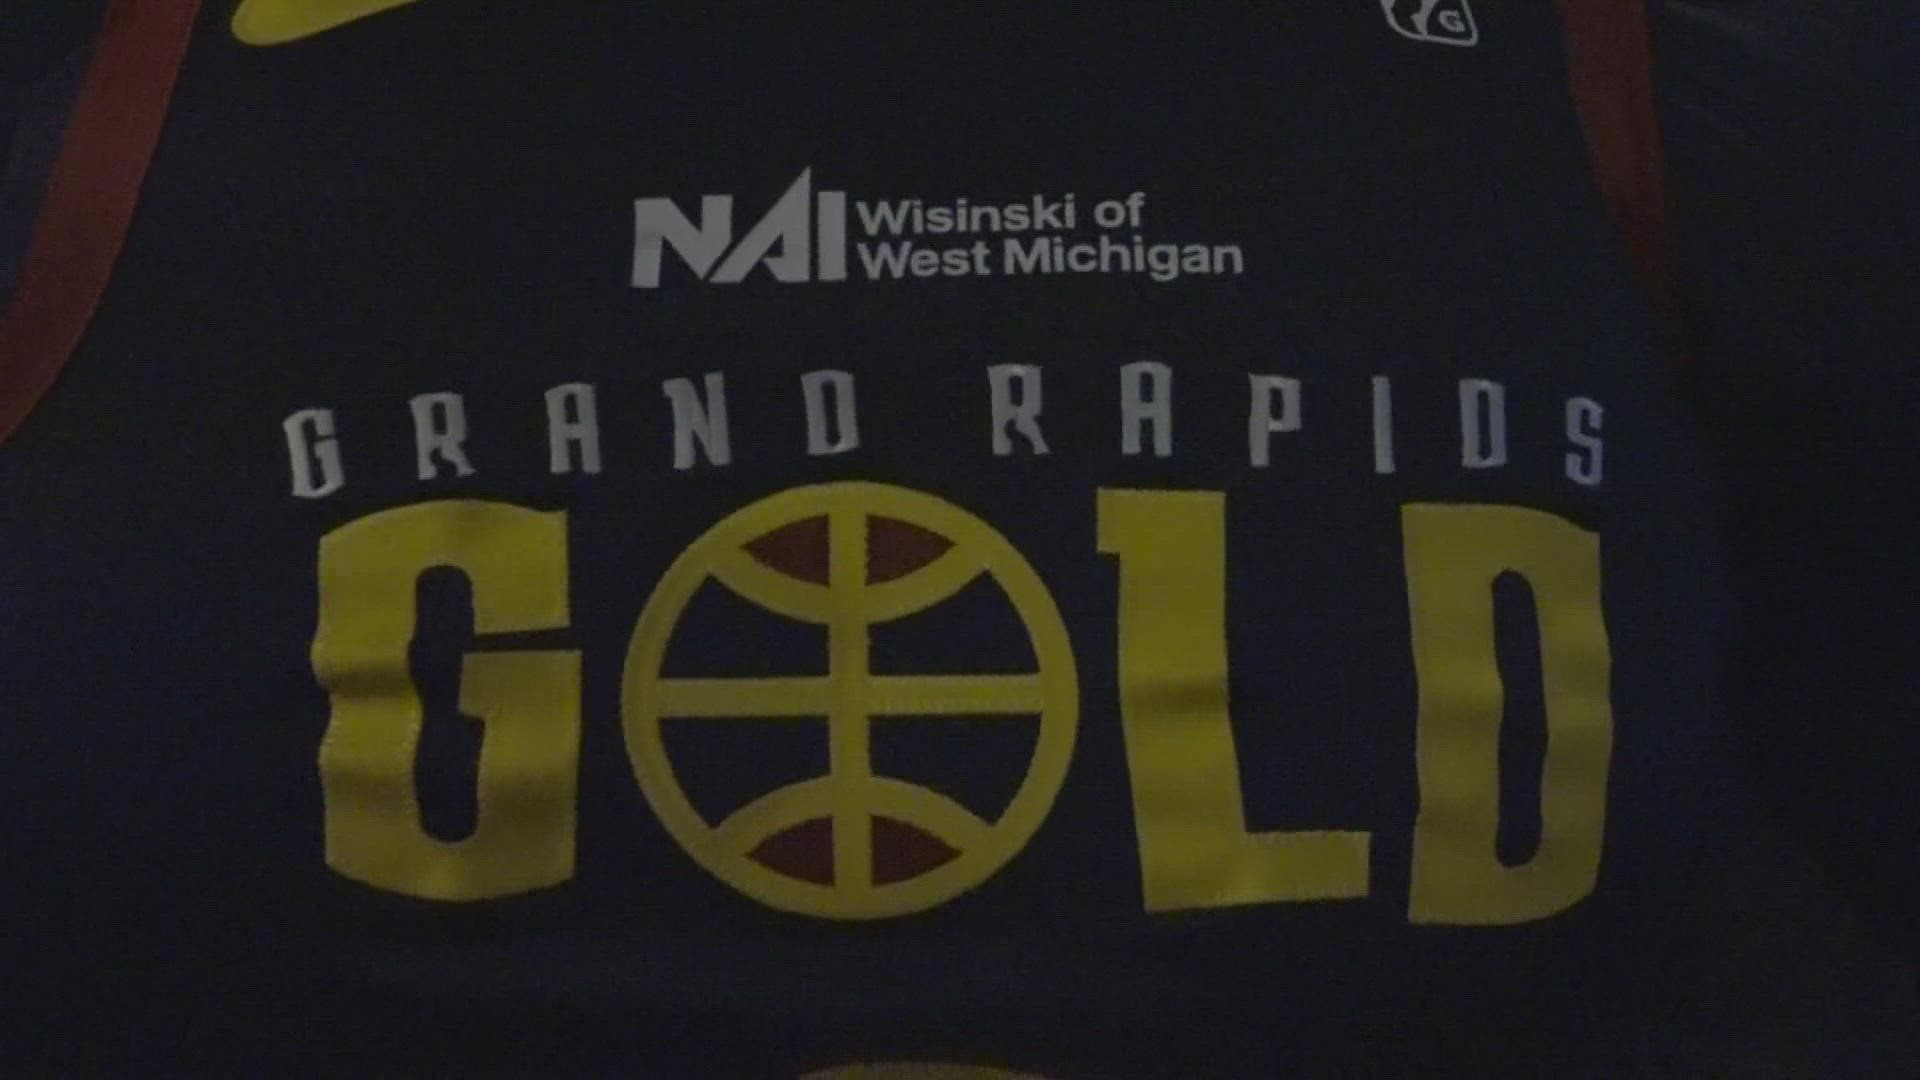 “We’re thrilled to share these new jerseys with our fans and with our community,” said Steve Jbara, president of the Grand Rapids Gold.